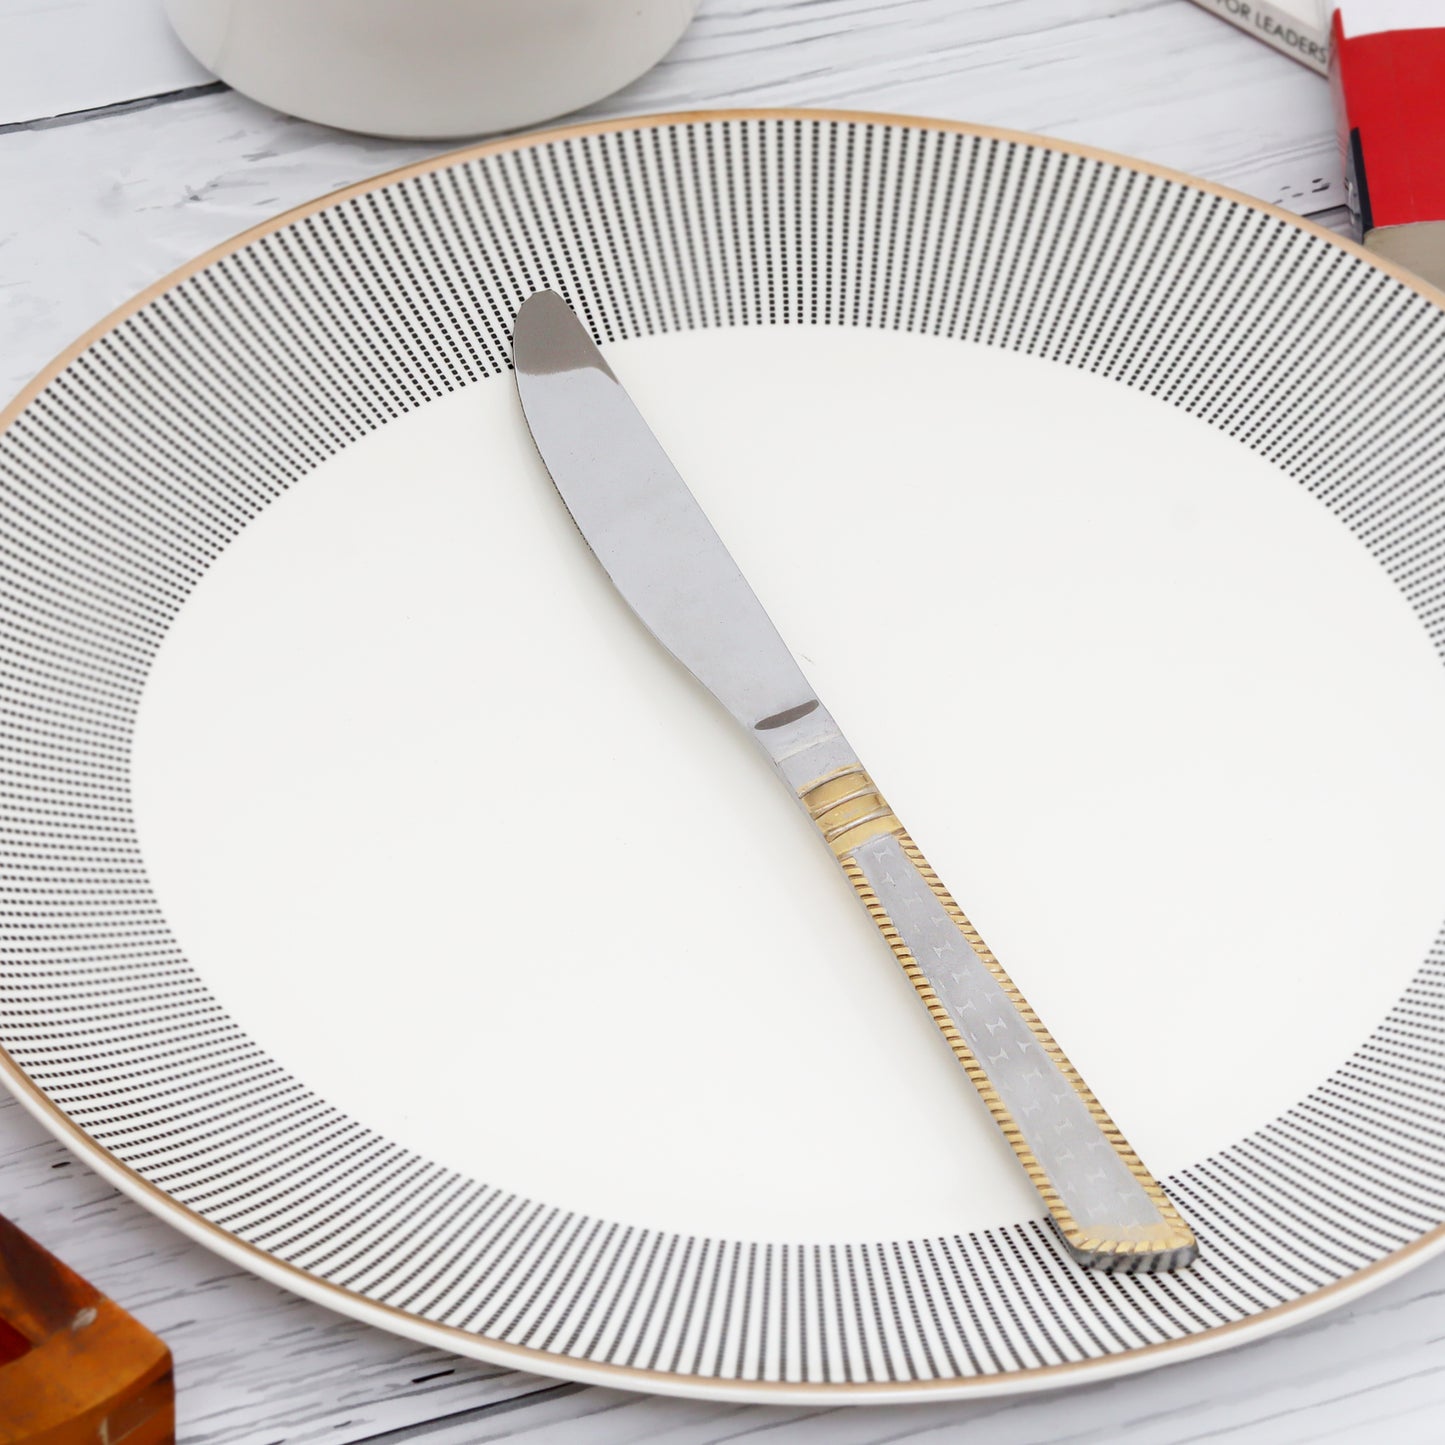 Elegant cutlery knife set by Swasha - redefine dining with timeless style